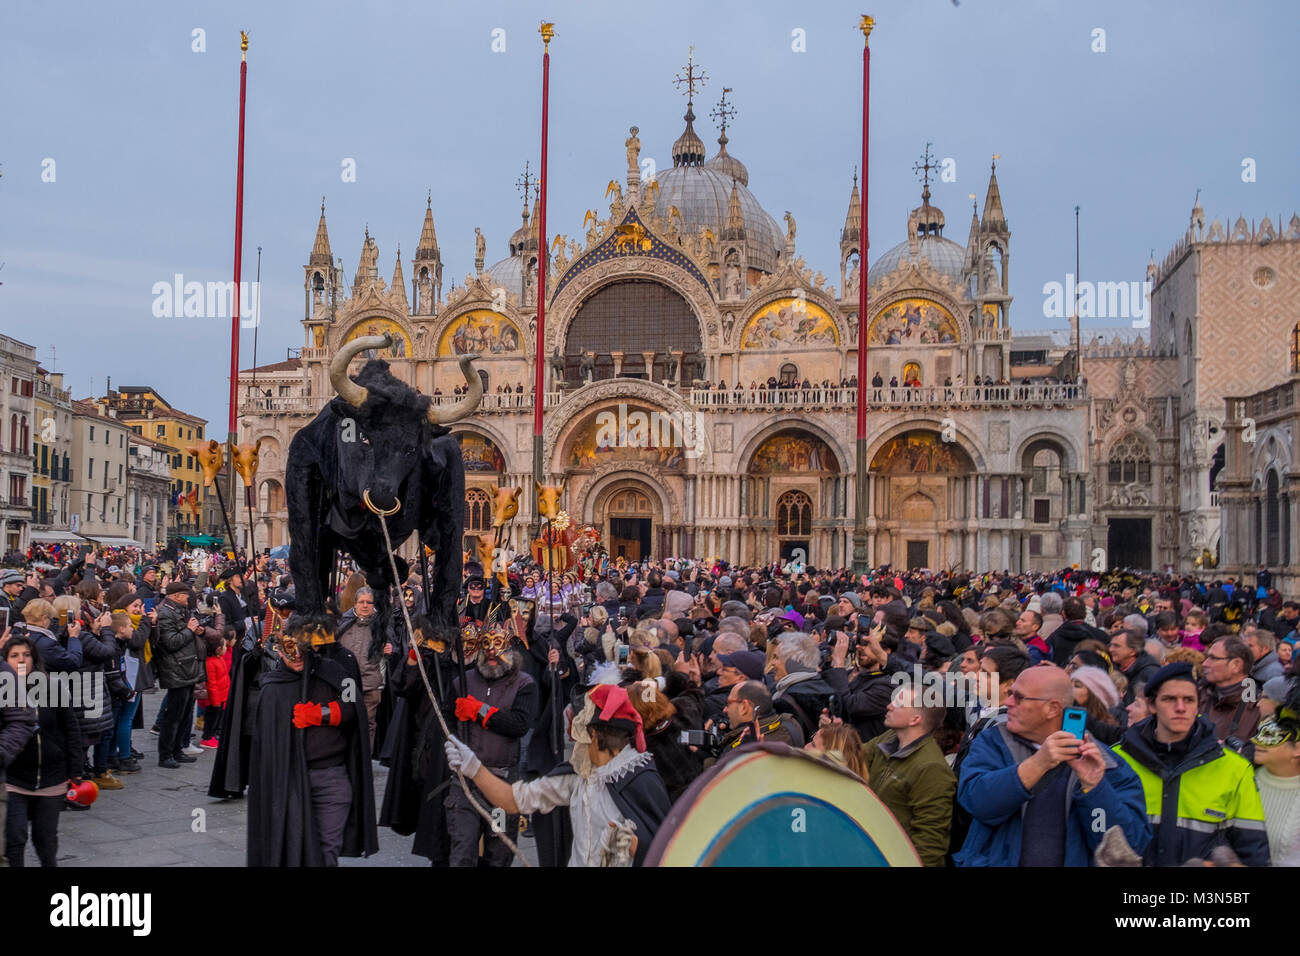 VENICE, ITALY - FEBRUARY 11: People wearing costumes attend the traditional events of Carnival 'Cutting off the Bull's head' and 'Dance of the Masks'  Stock Photo